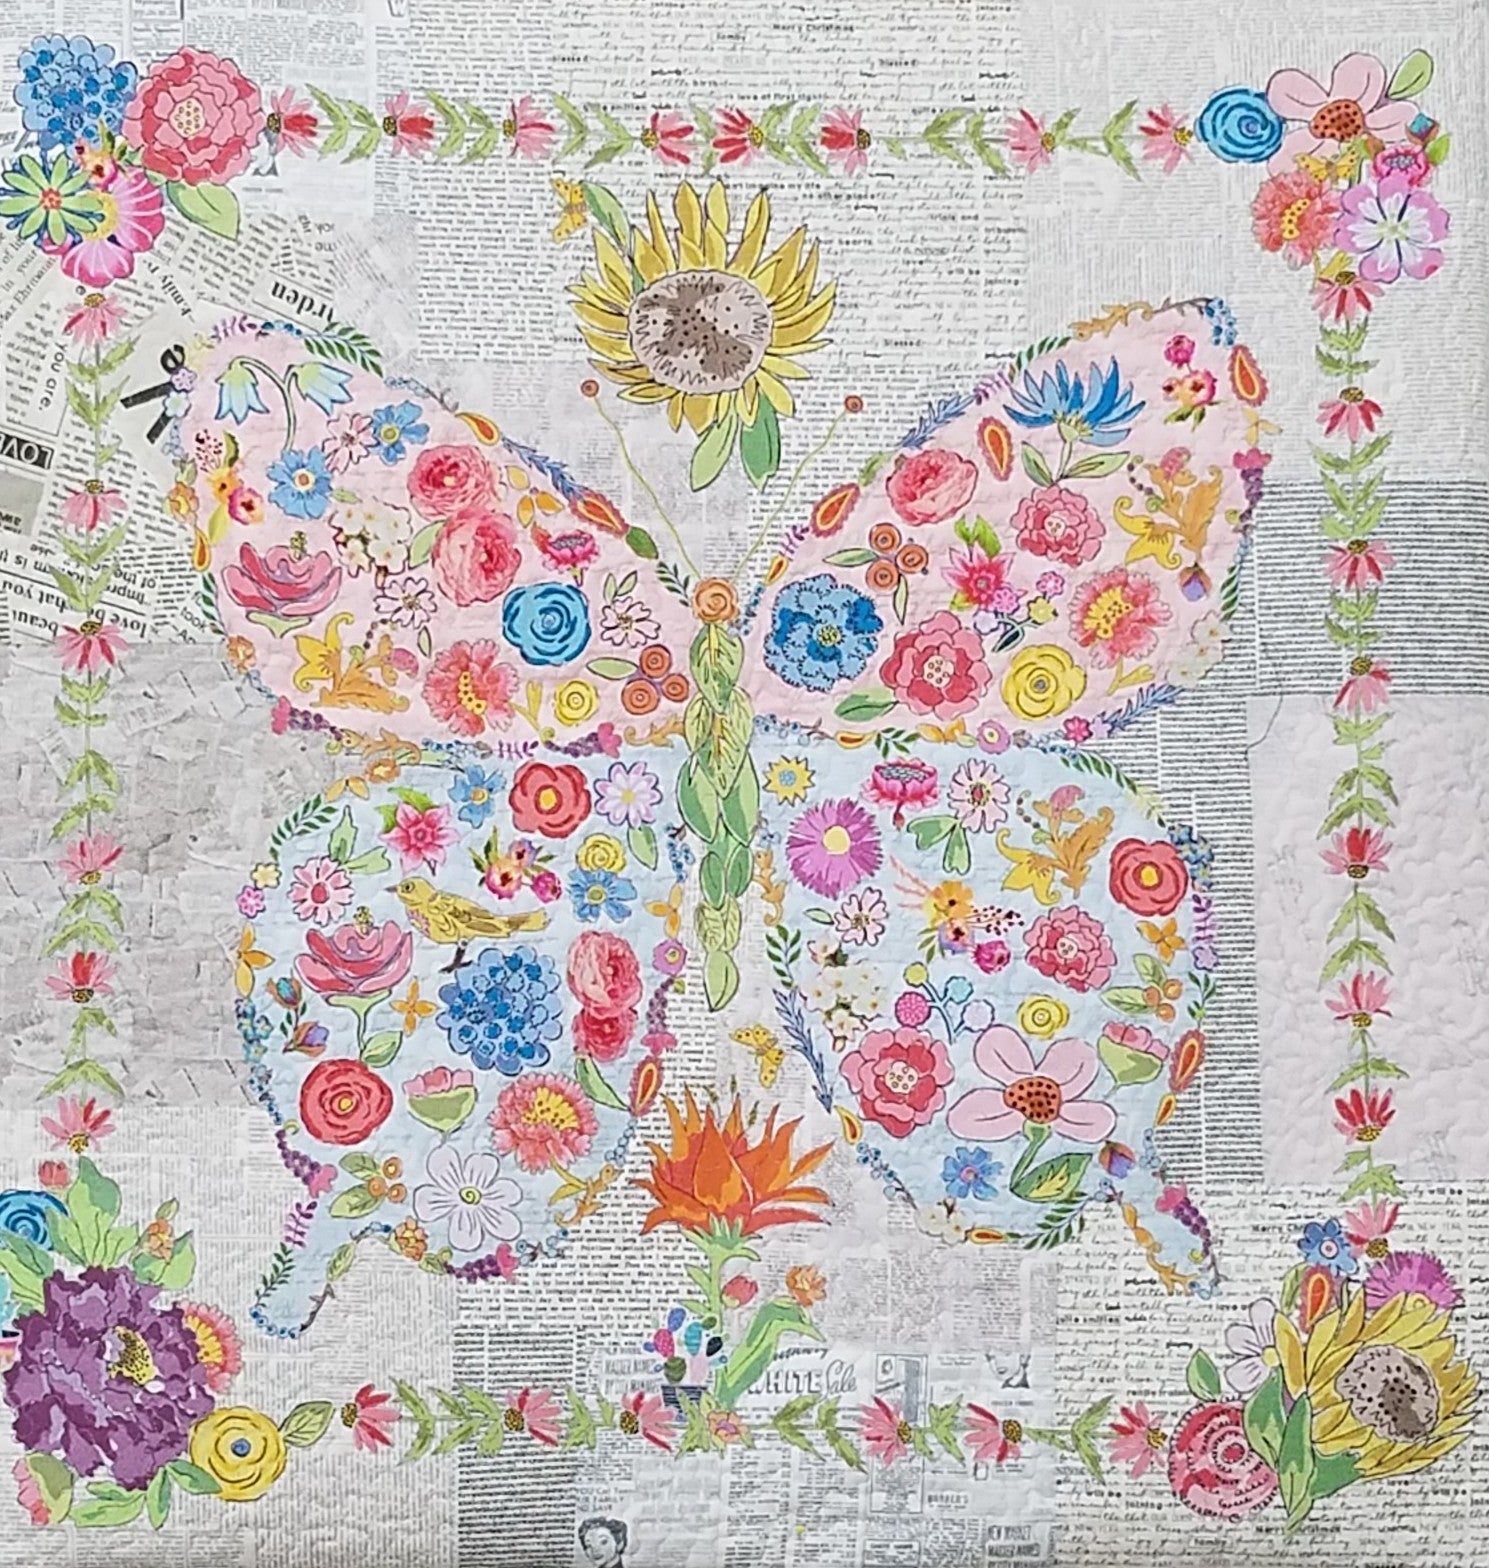 Flowerfly (Butterfly) Collage Quilt Kit by Doris Rice, Certified Instructor for Laura Heine